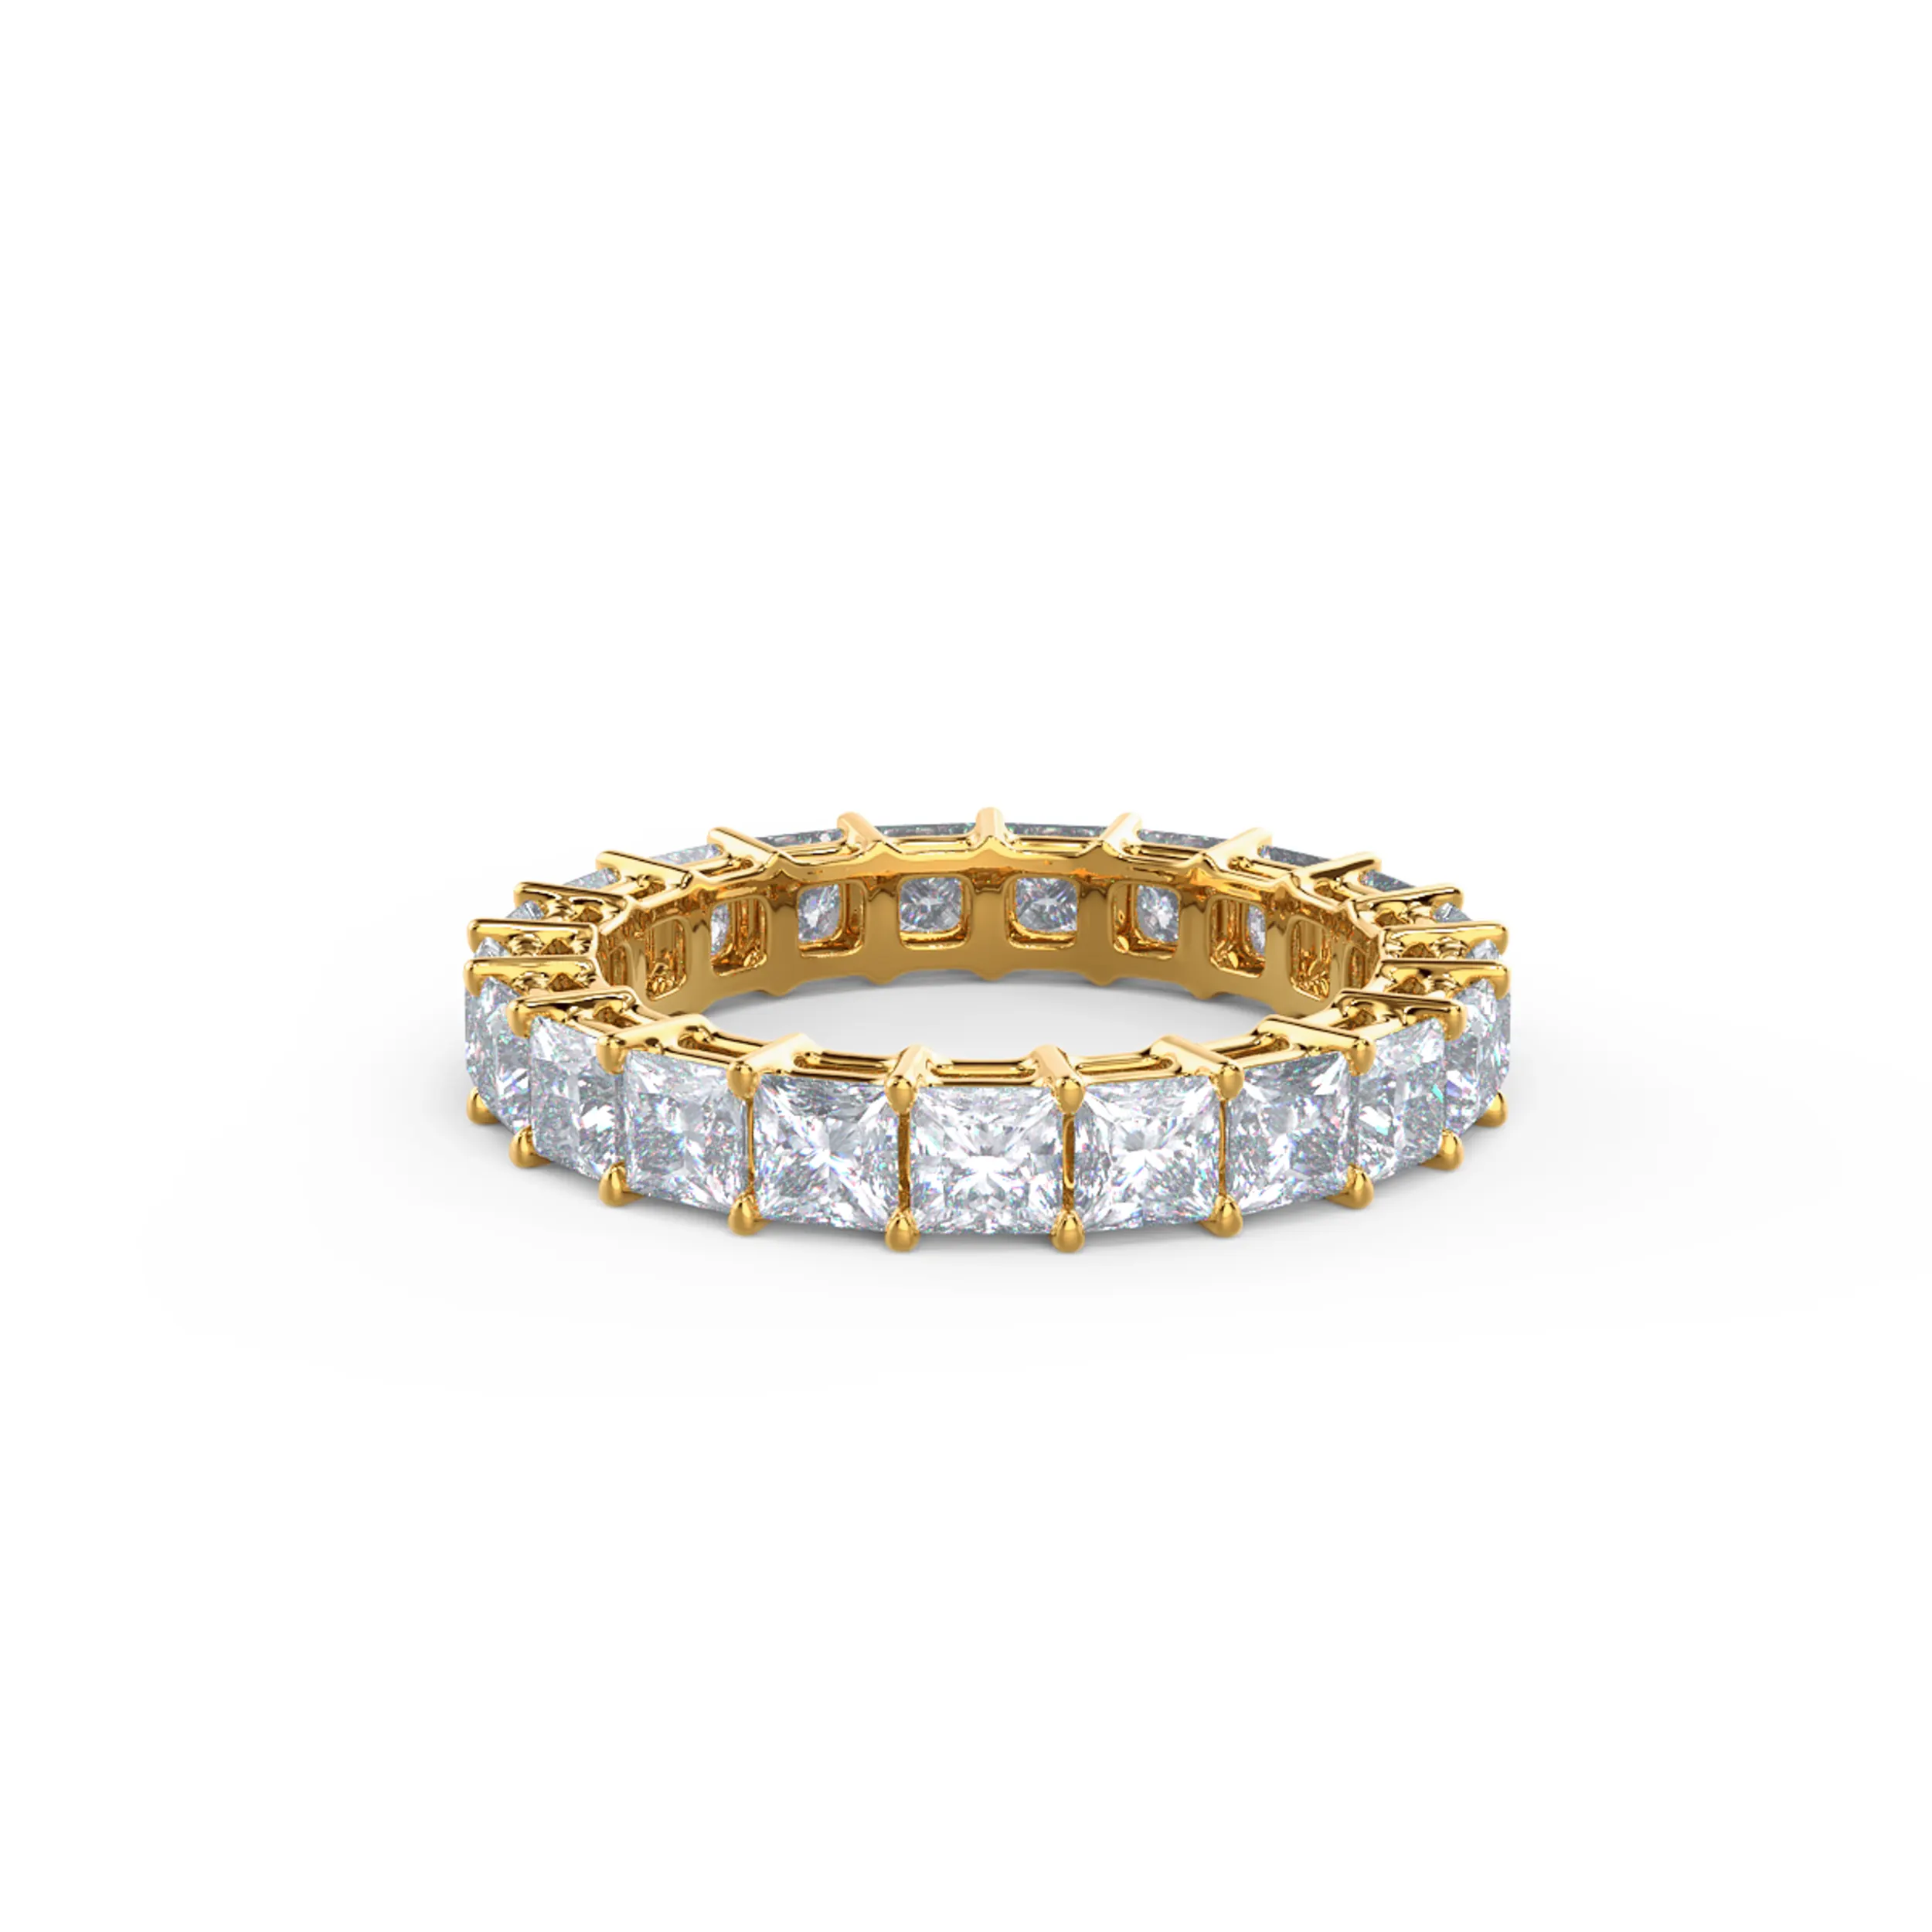 Hand Selected 4.0 Carat Lab Grown Diamonds set in 14kt Yellow Gold Princess Eternity Band (Main View)